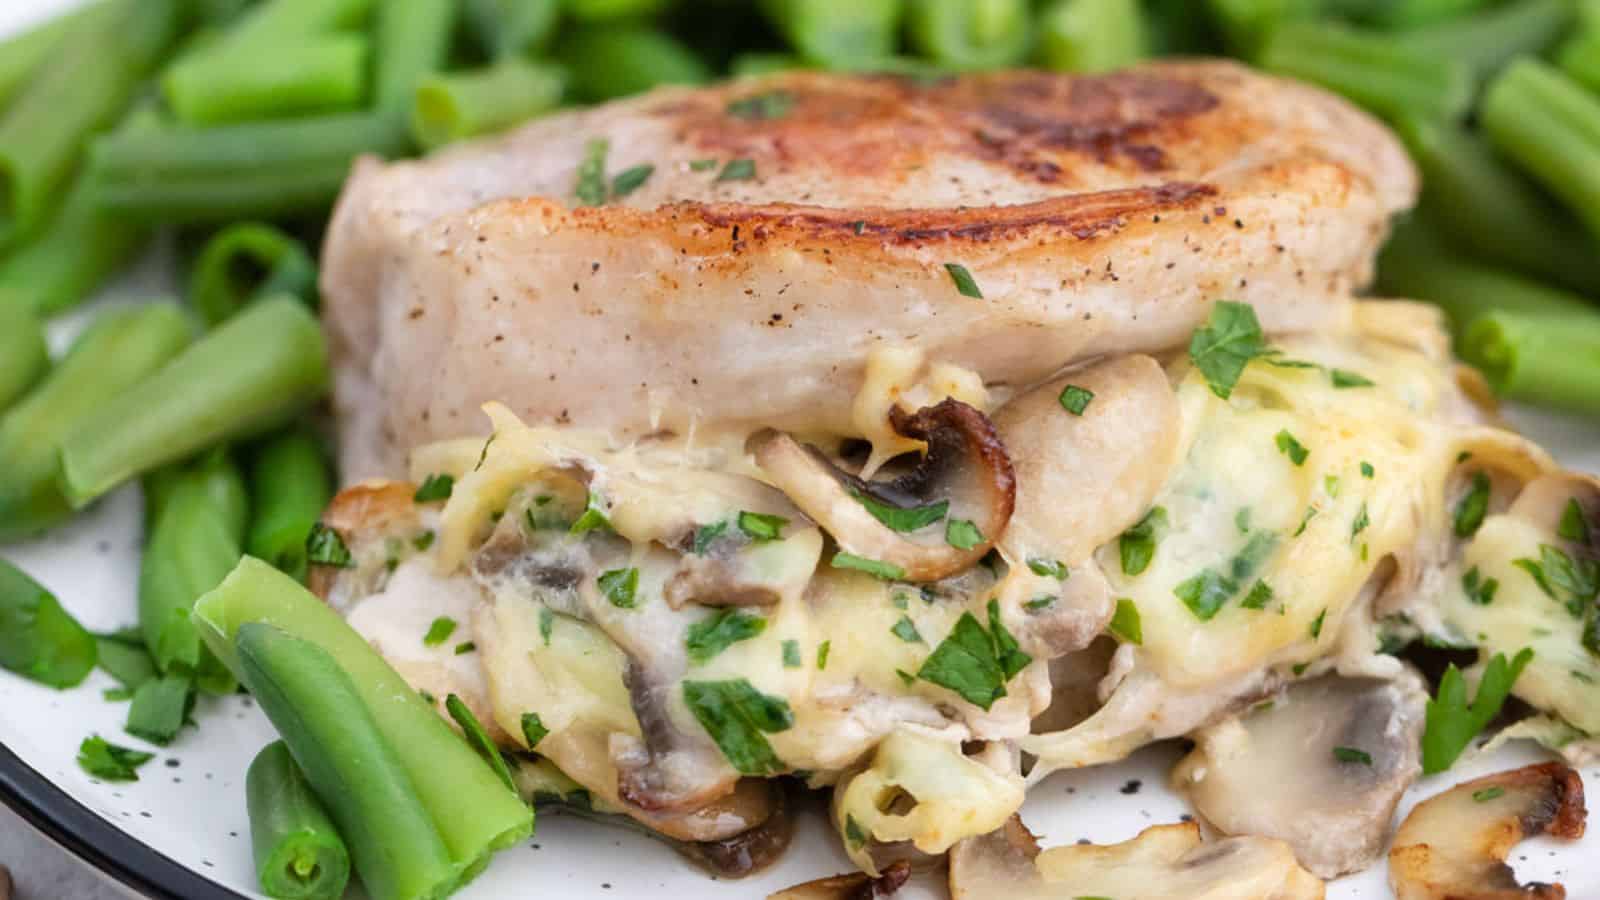 A plate of pork chops stuffed with mushrooms and cheese served with green beans.